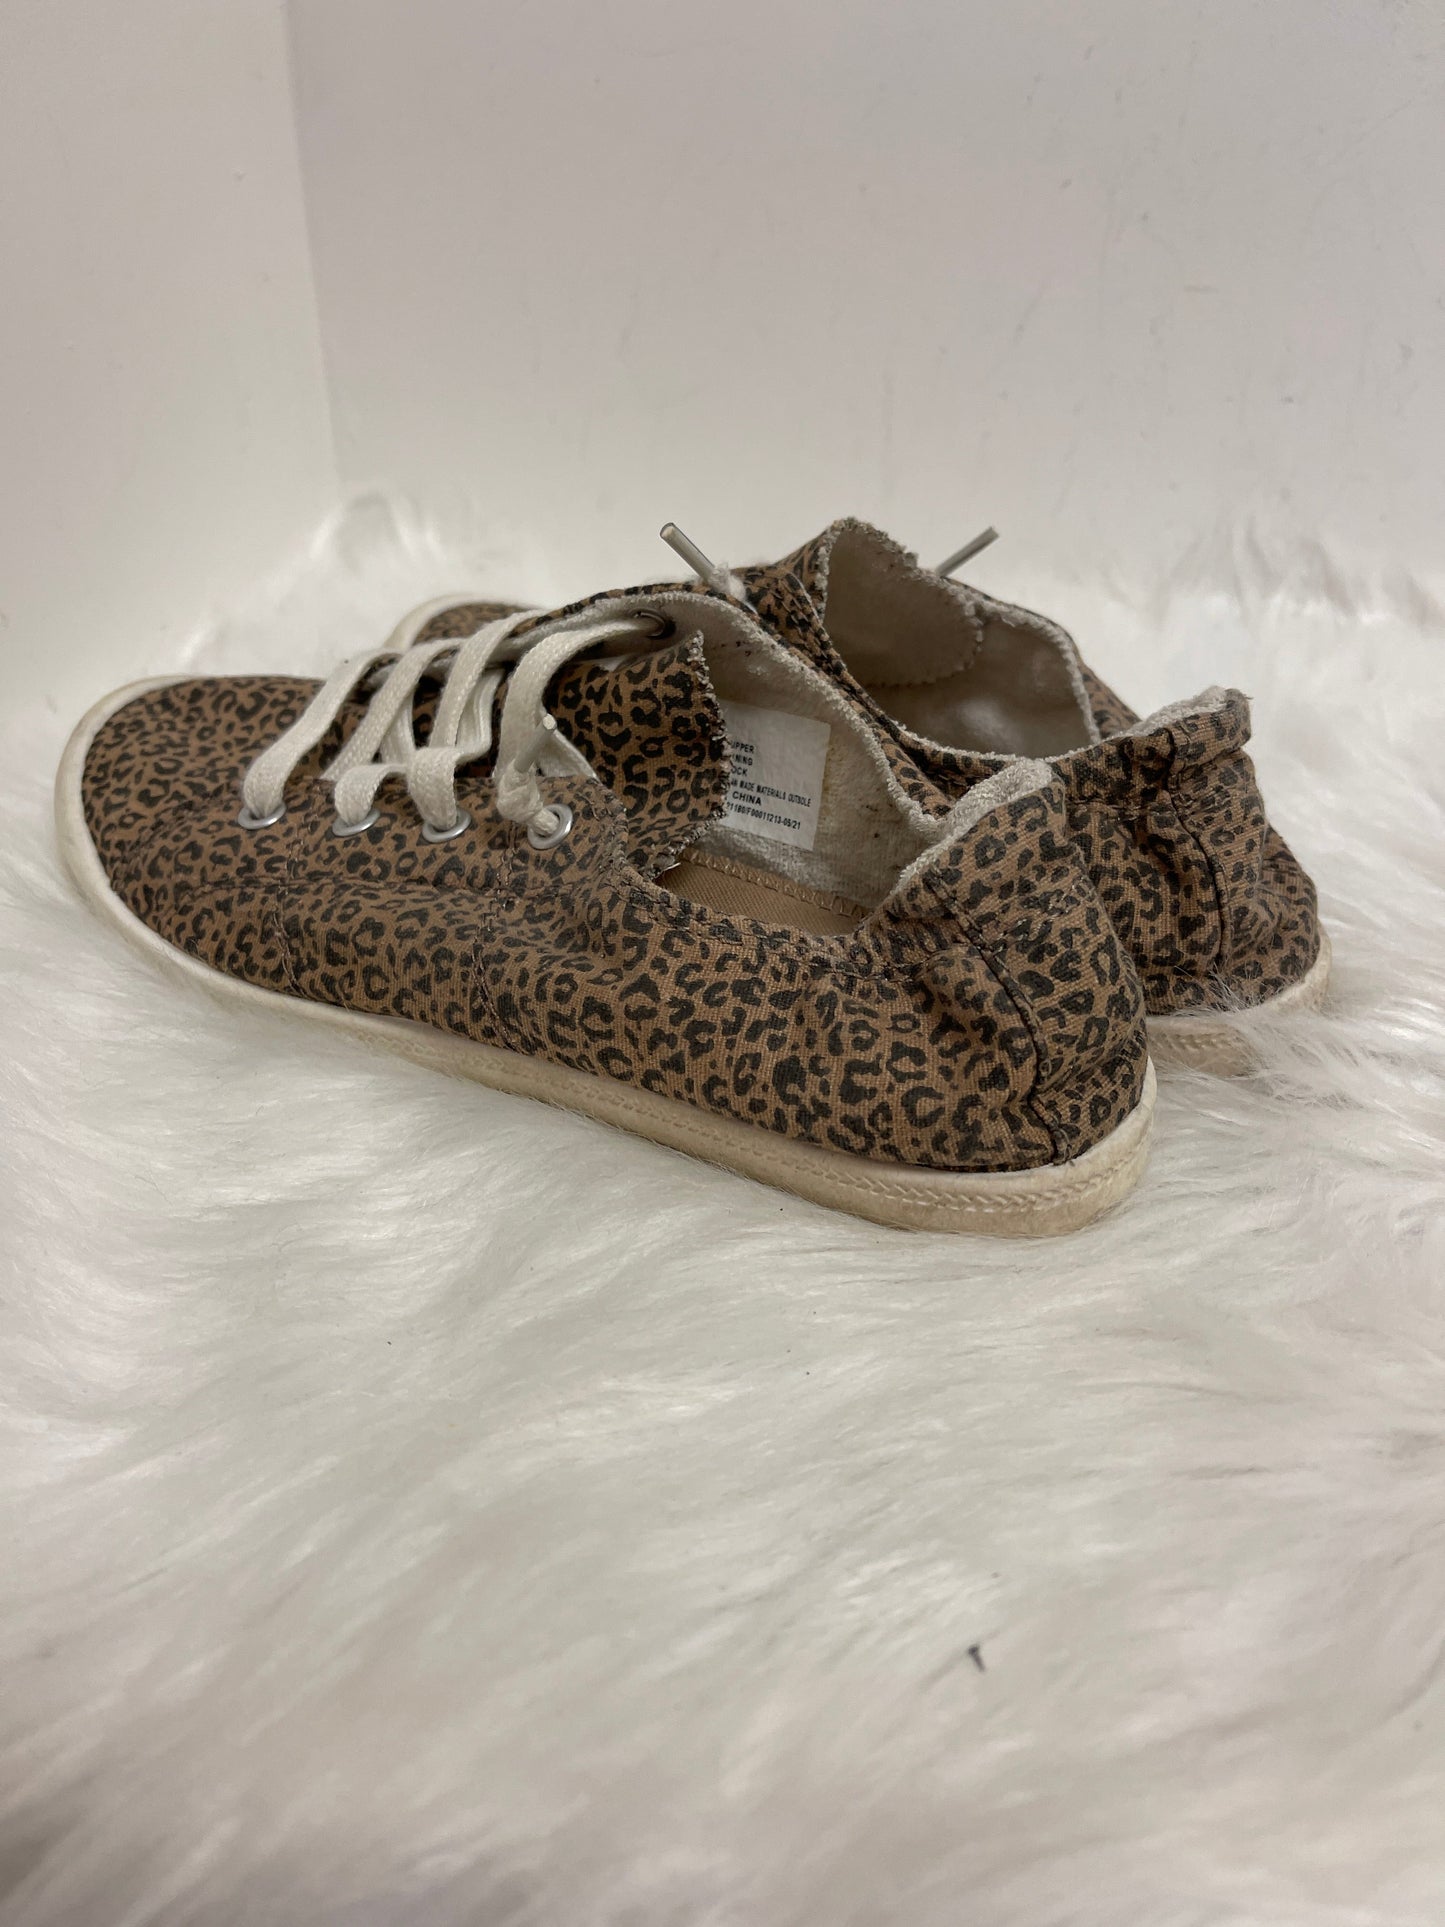 Animal Print Shoes Sneakers Mad Love, Size 7